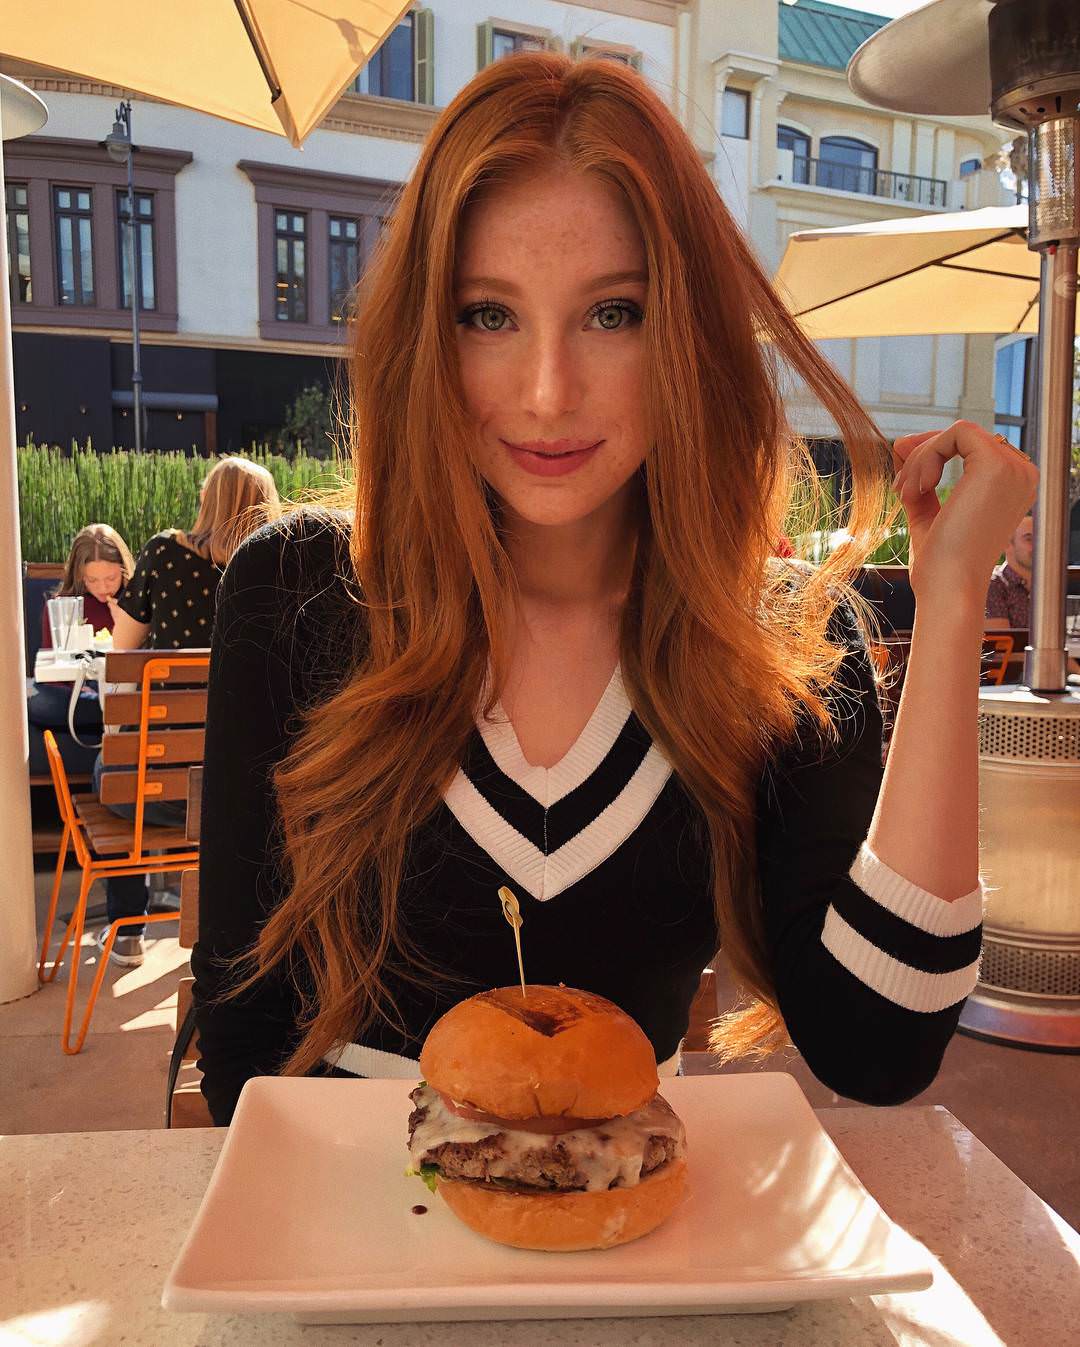 Lunch date with Madeline Porn